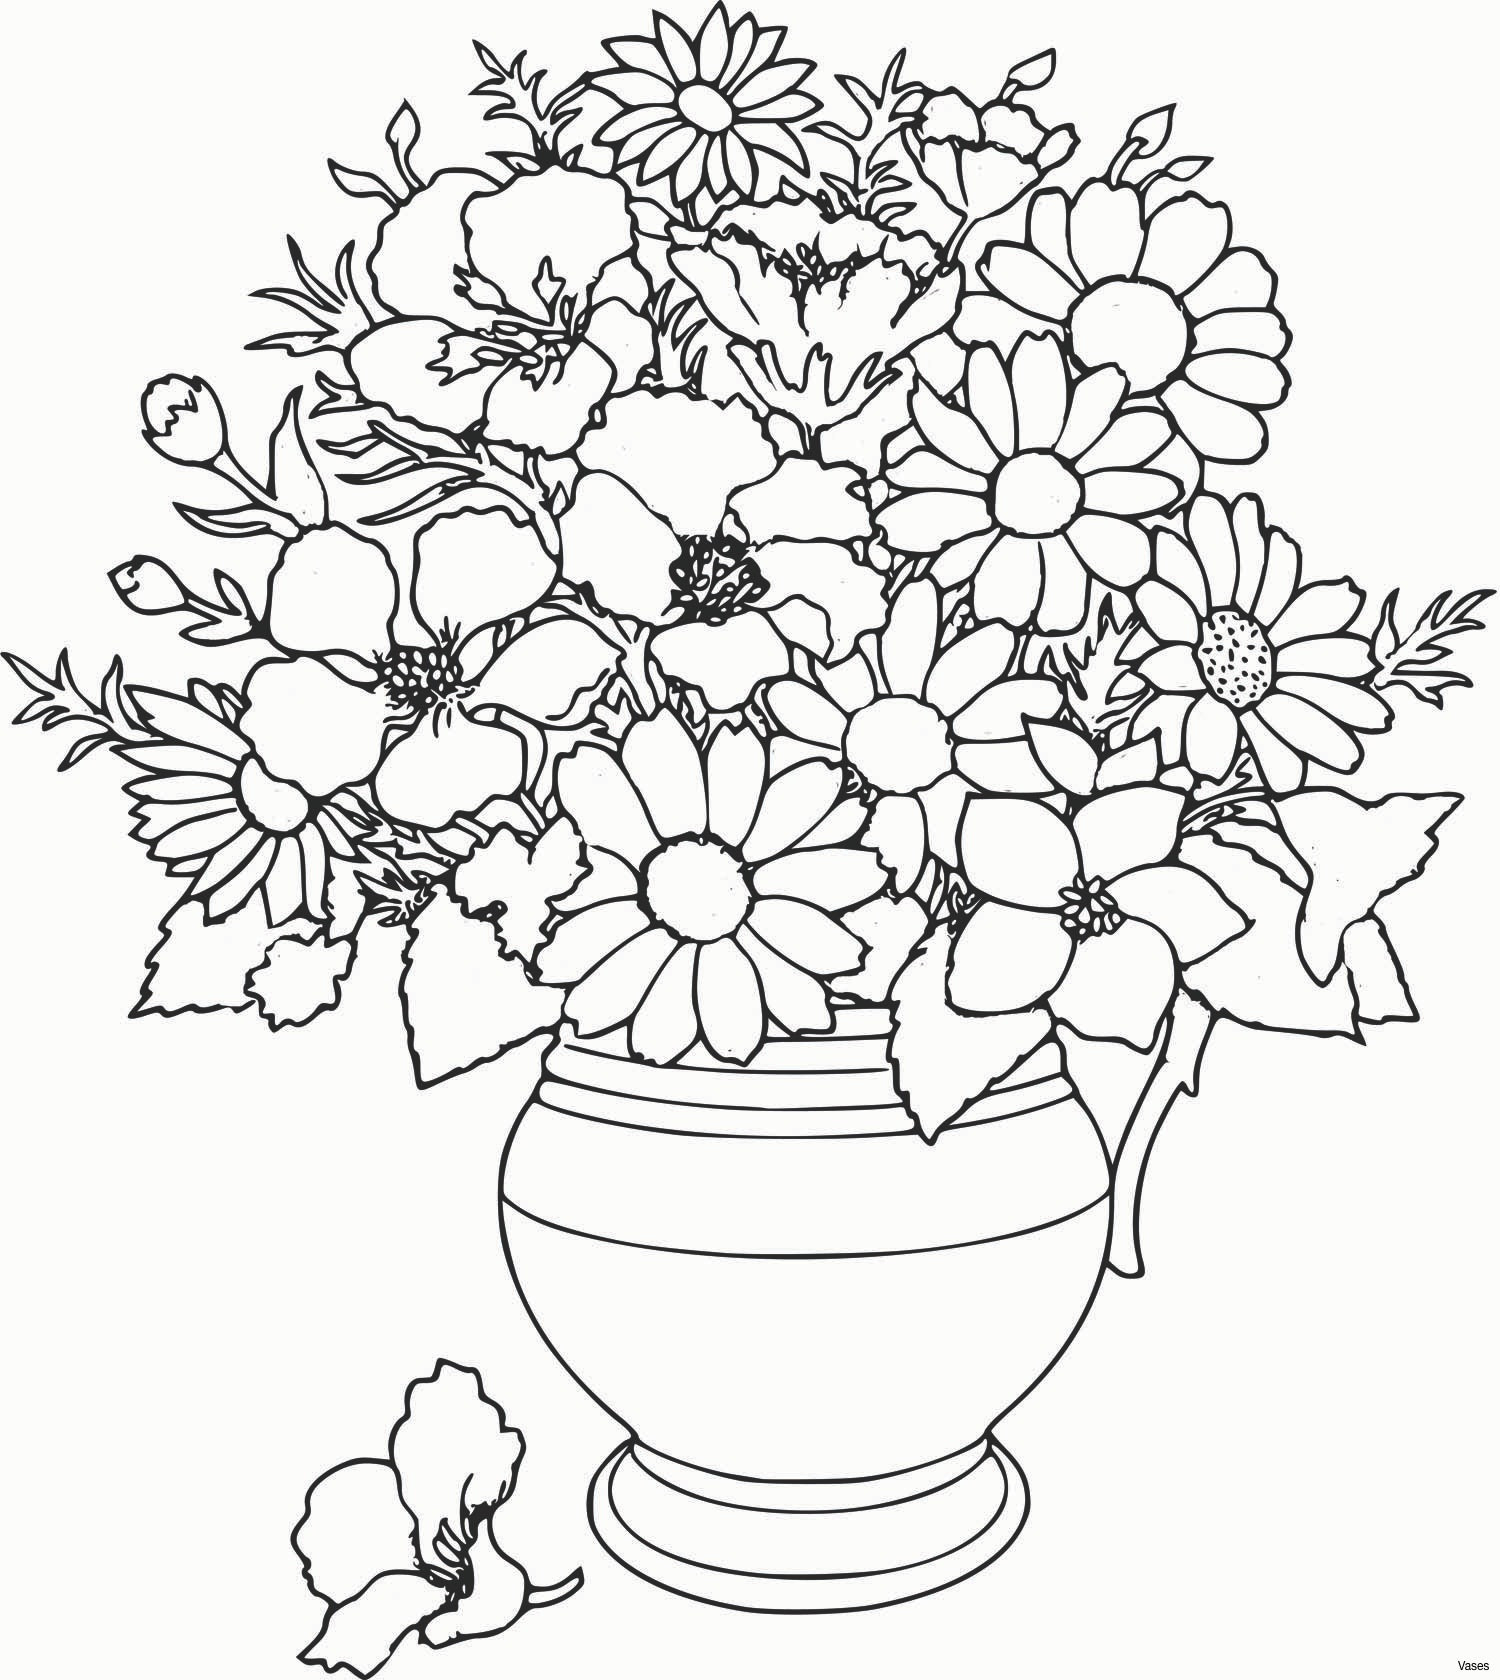 Bouquet Of Flowers Coloring Page Images Of Printable Flower Vase Coloring Pages Sabadaphnecottage